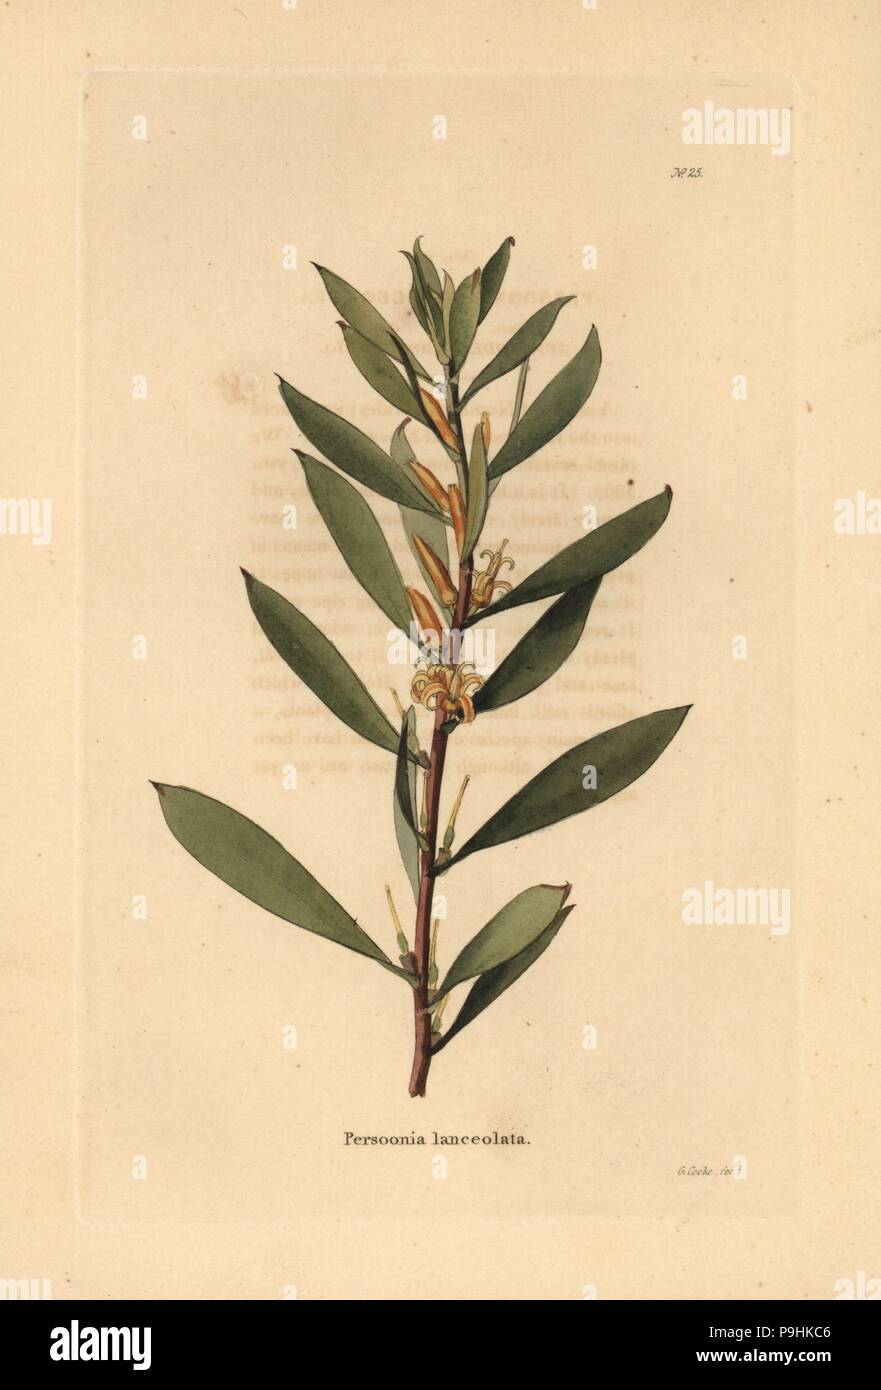 Geebung or snottygobby, Persoonia lanceolata. Handcoloured copperplate engraving by George Cooke from Conrad Loddiges' Botanical Cabinet, Hackney, 1817. Stock Photo